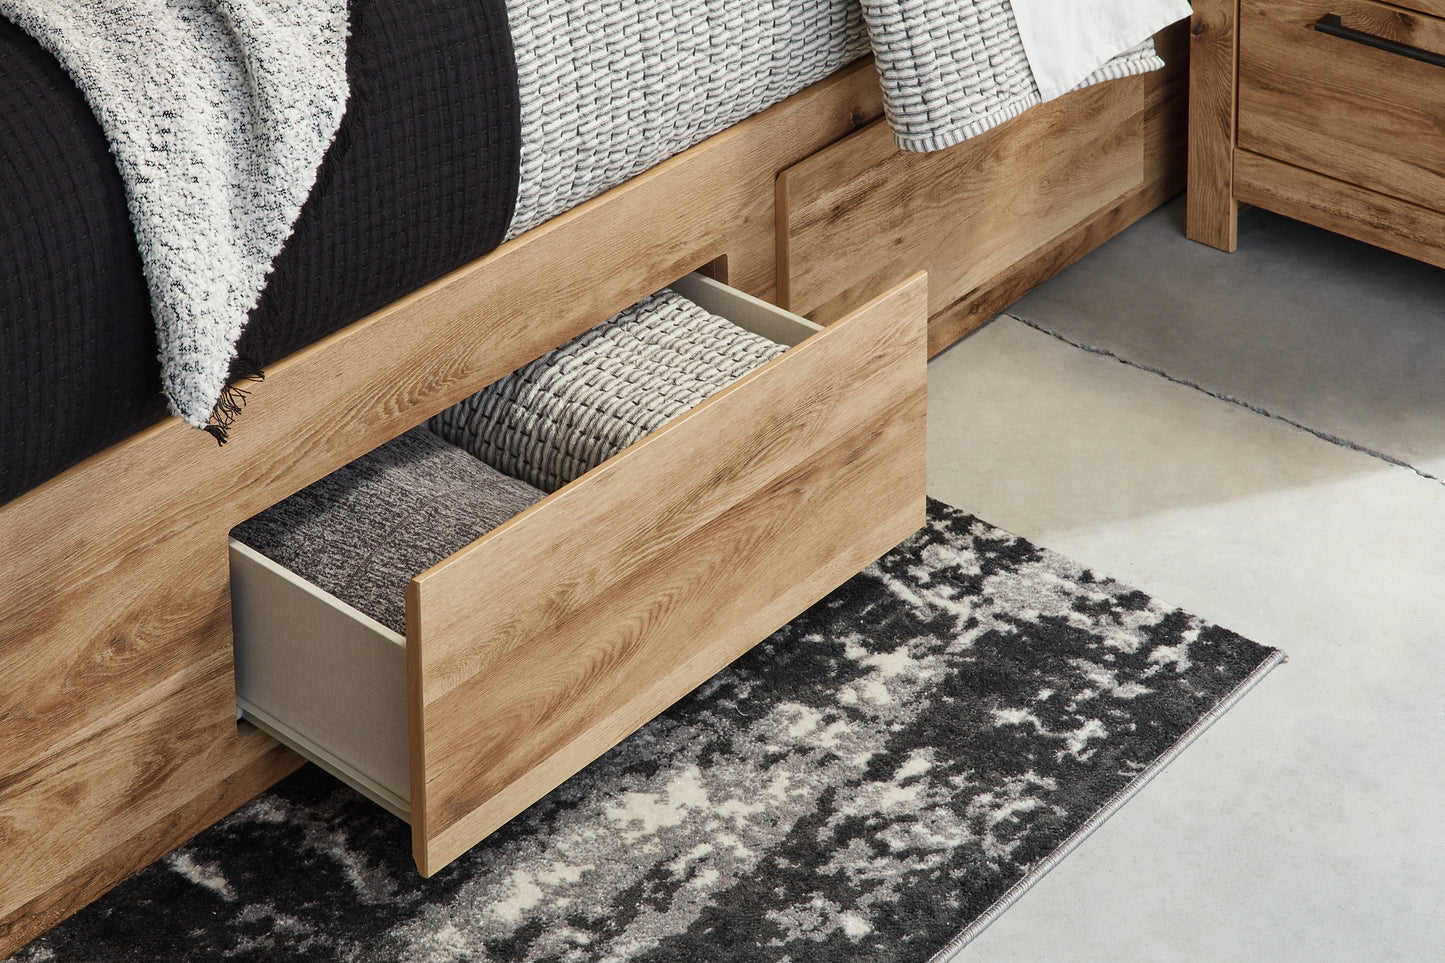 Hyanna Queen Panel Storage Bed with 2 Under Bed Storage Drawers Signature Design by Ashley®